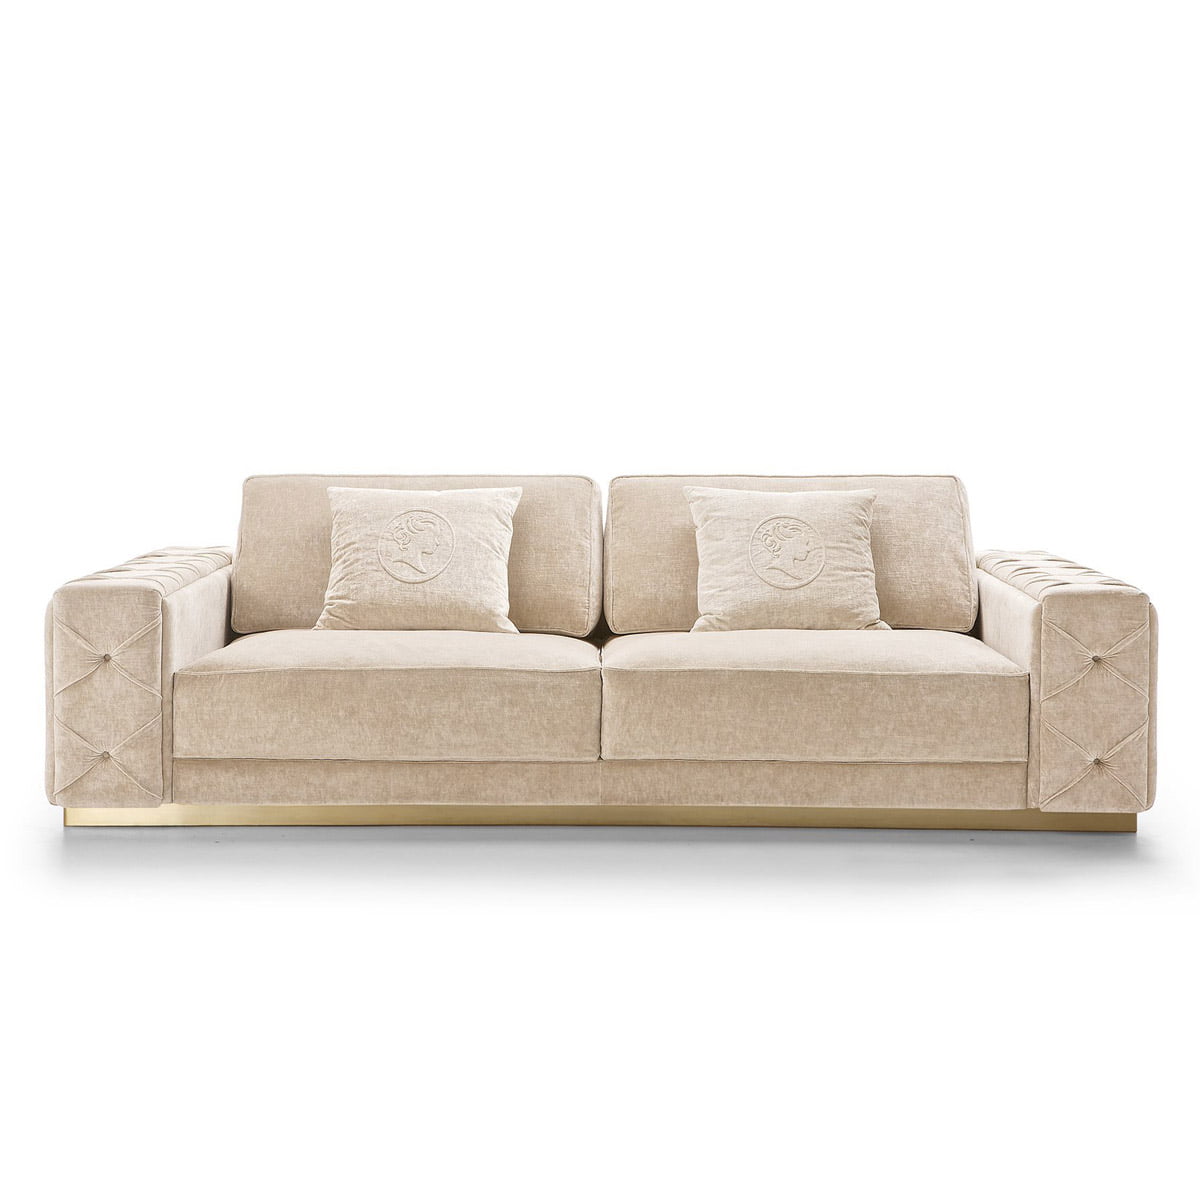 Luxury modern sofa with wide arms